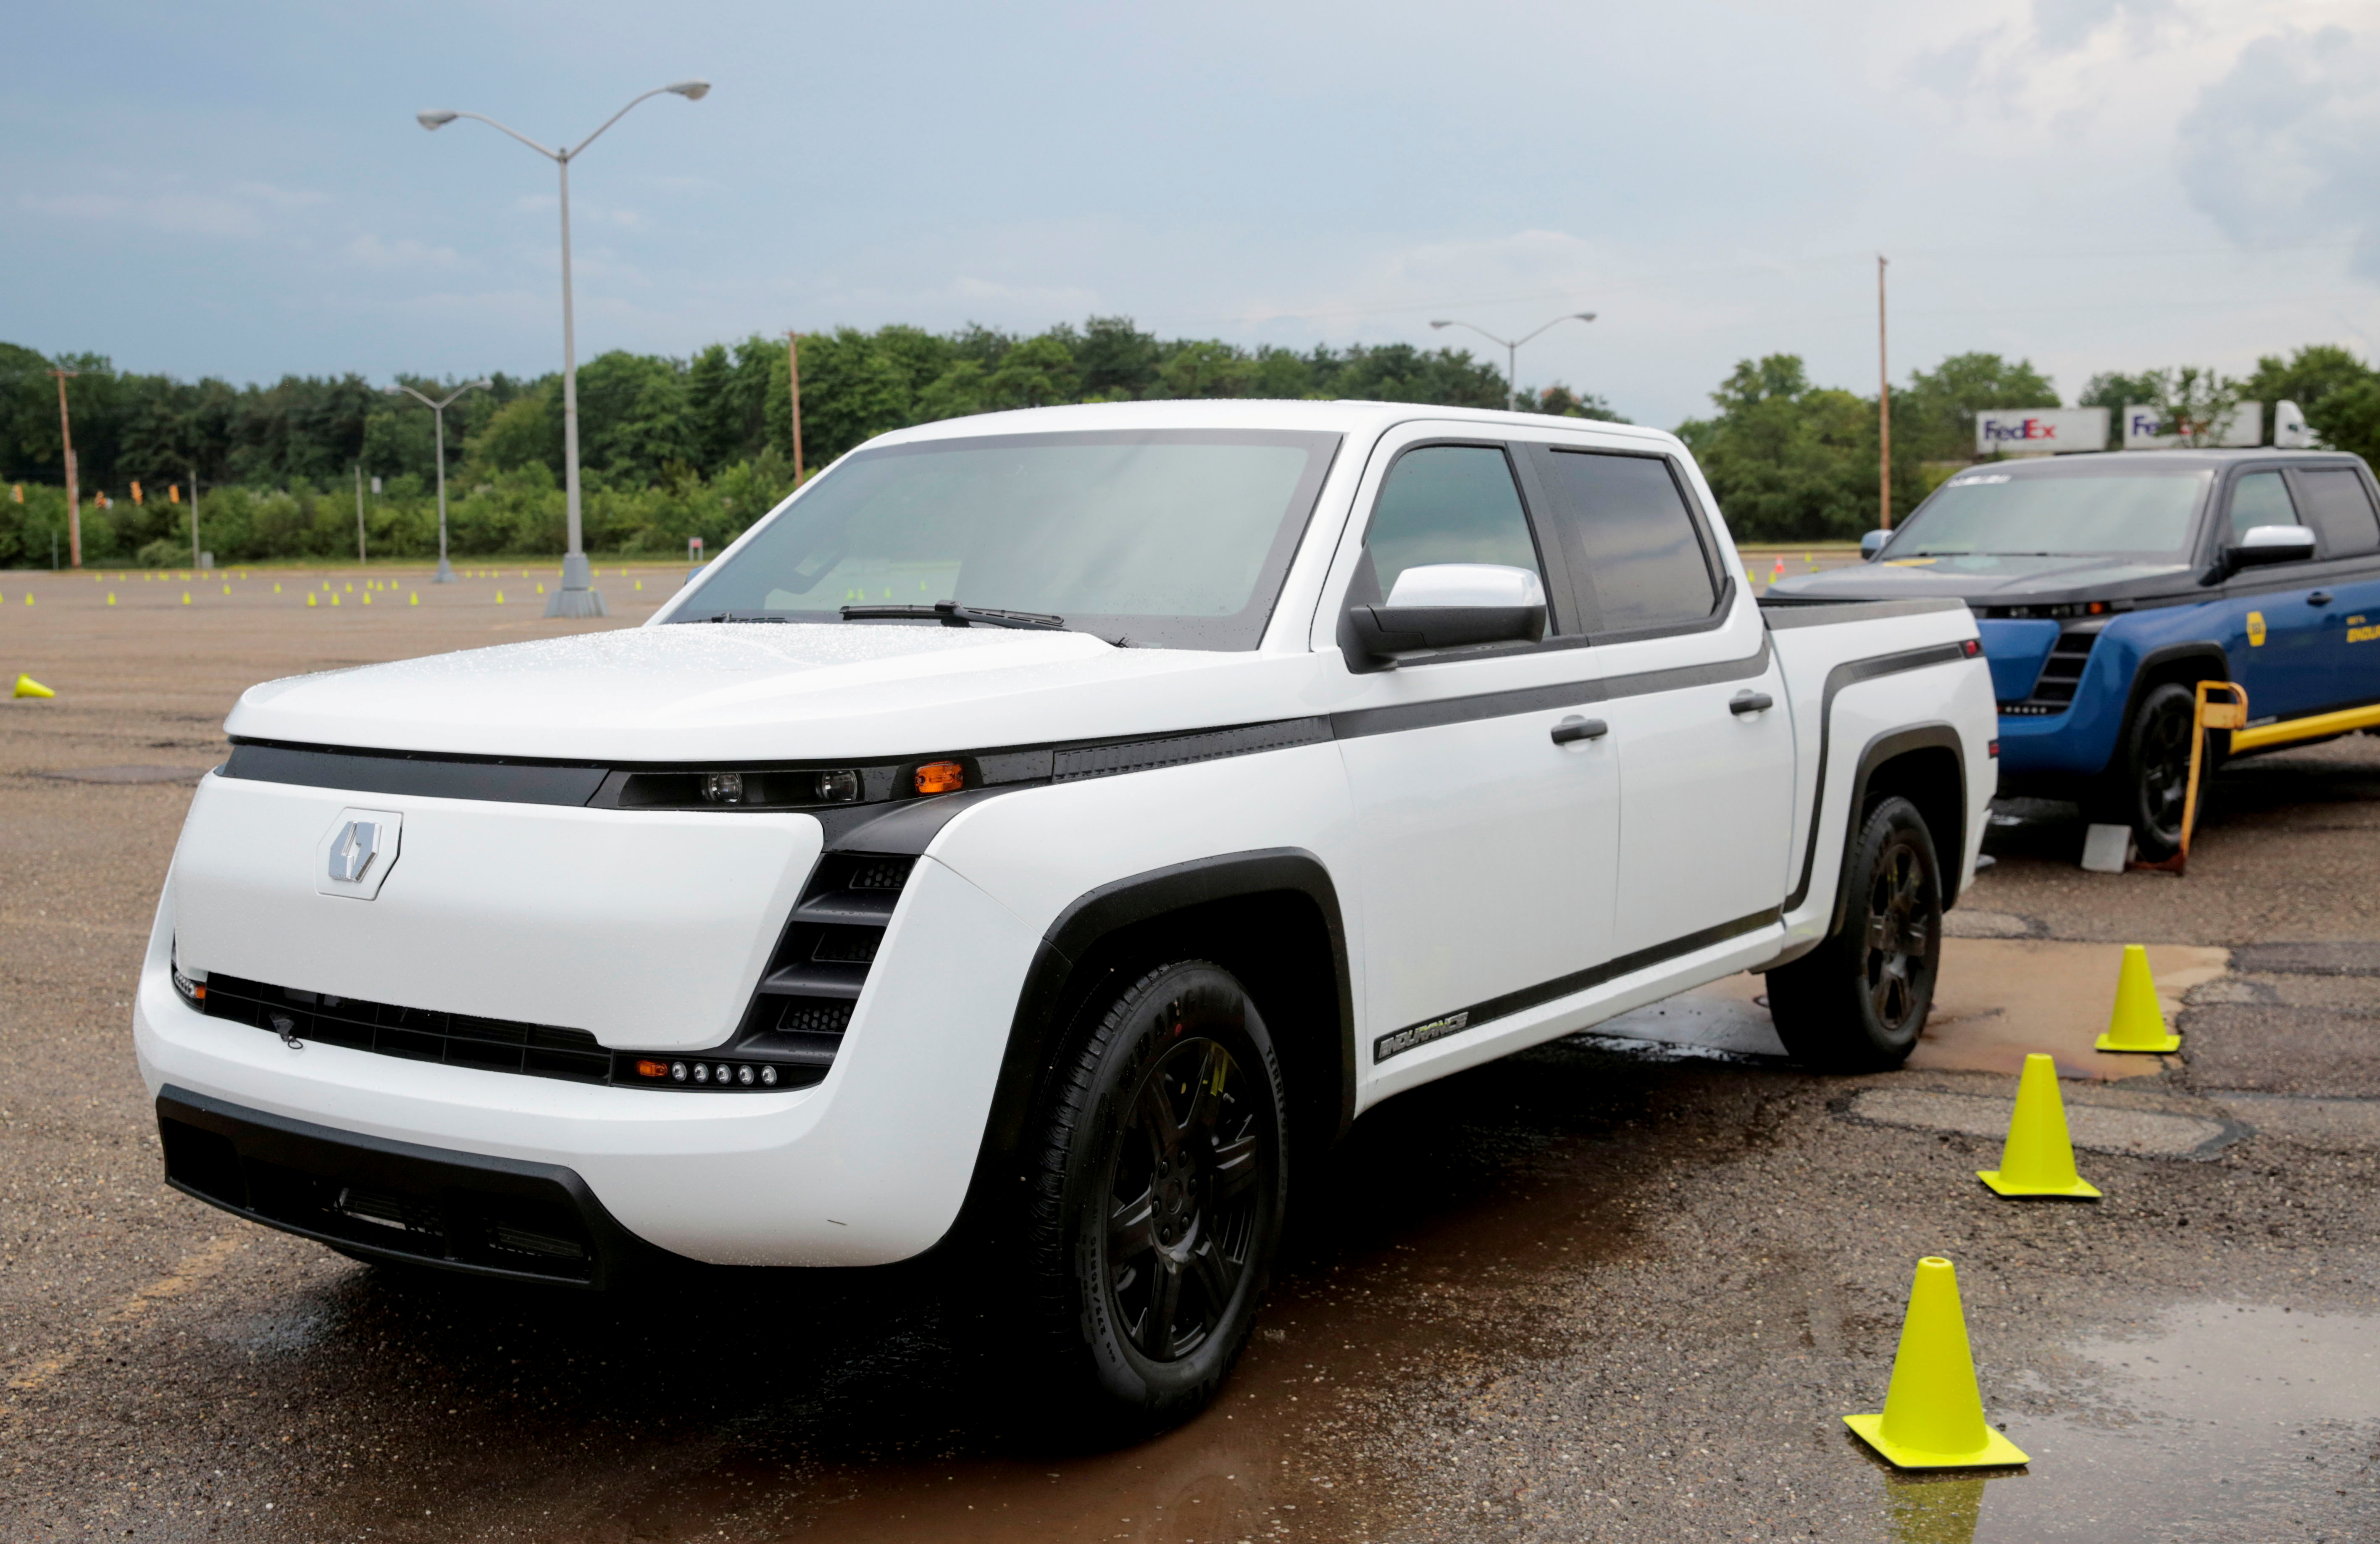 A Lordstown Motors beta version of its all electric pickup truck, the Endurance, is seen in Lordstown